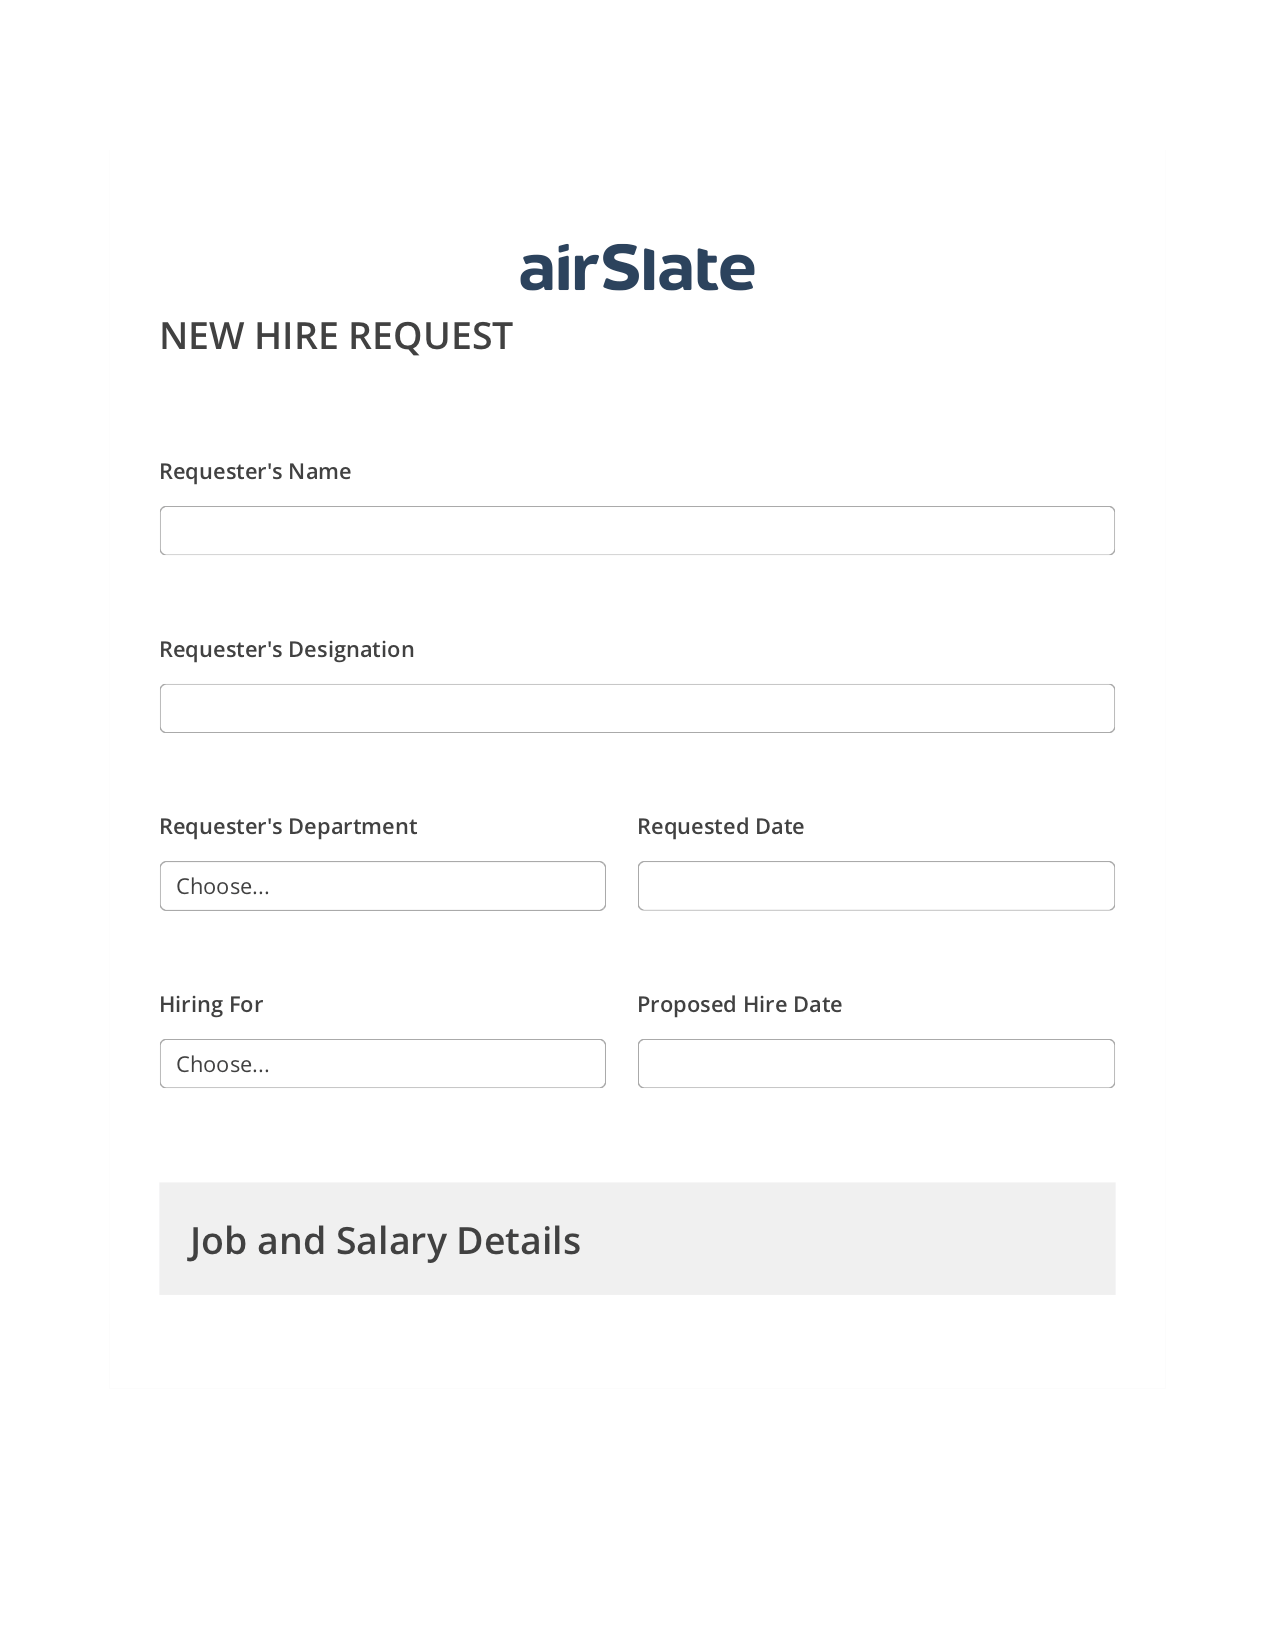 Hiring Request Workflow Pre-fill from Office 365 Excel Bot, Remove Tags From Slate Bot, Post-finish Document Bot